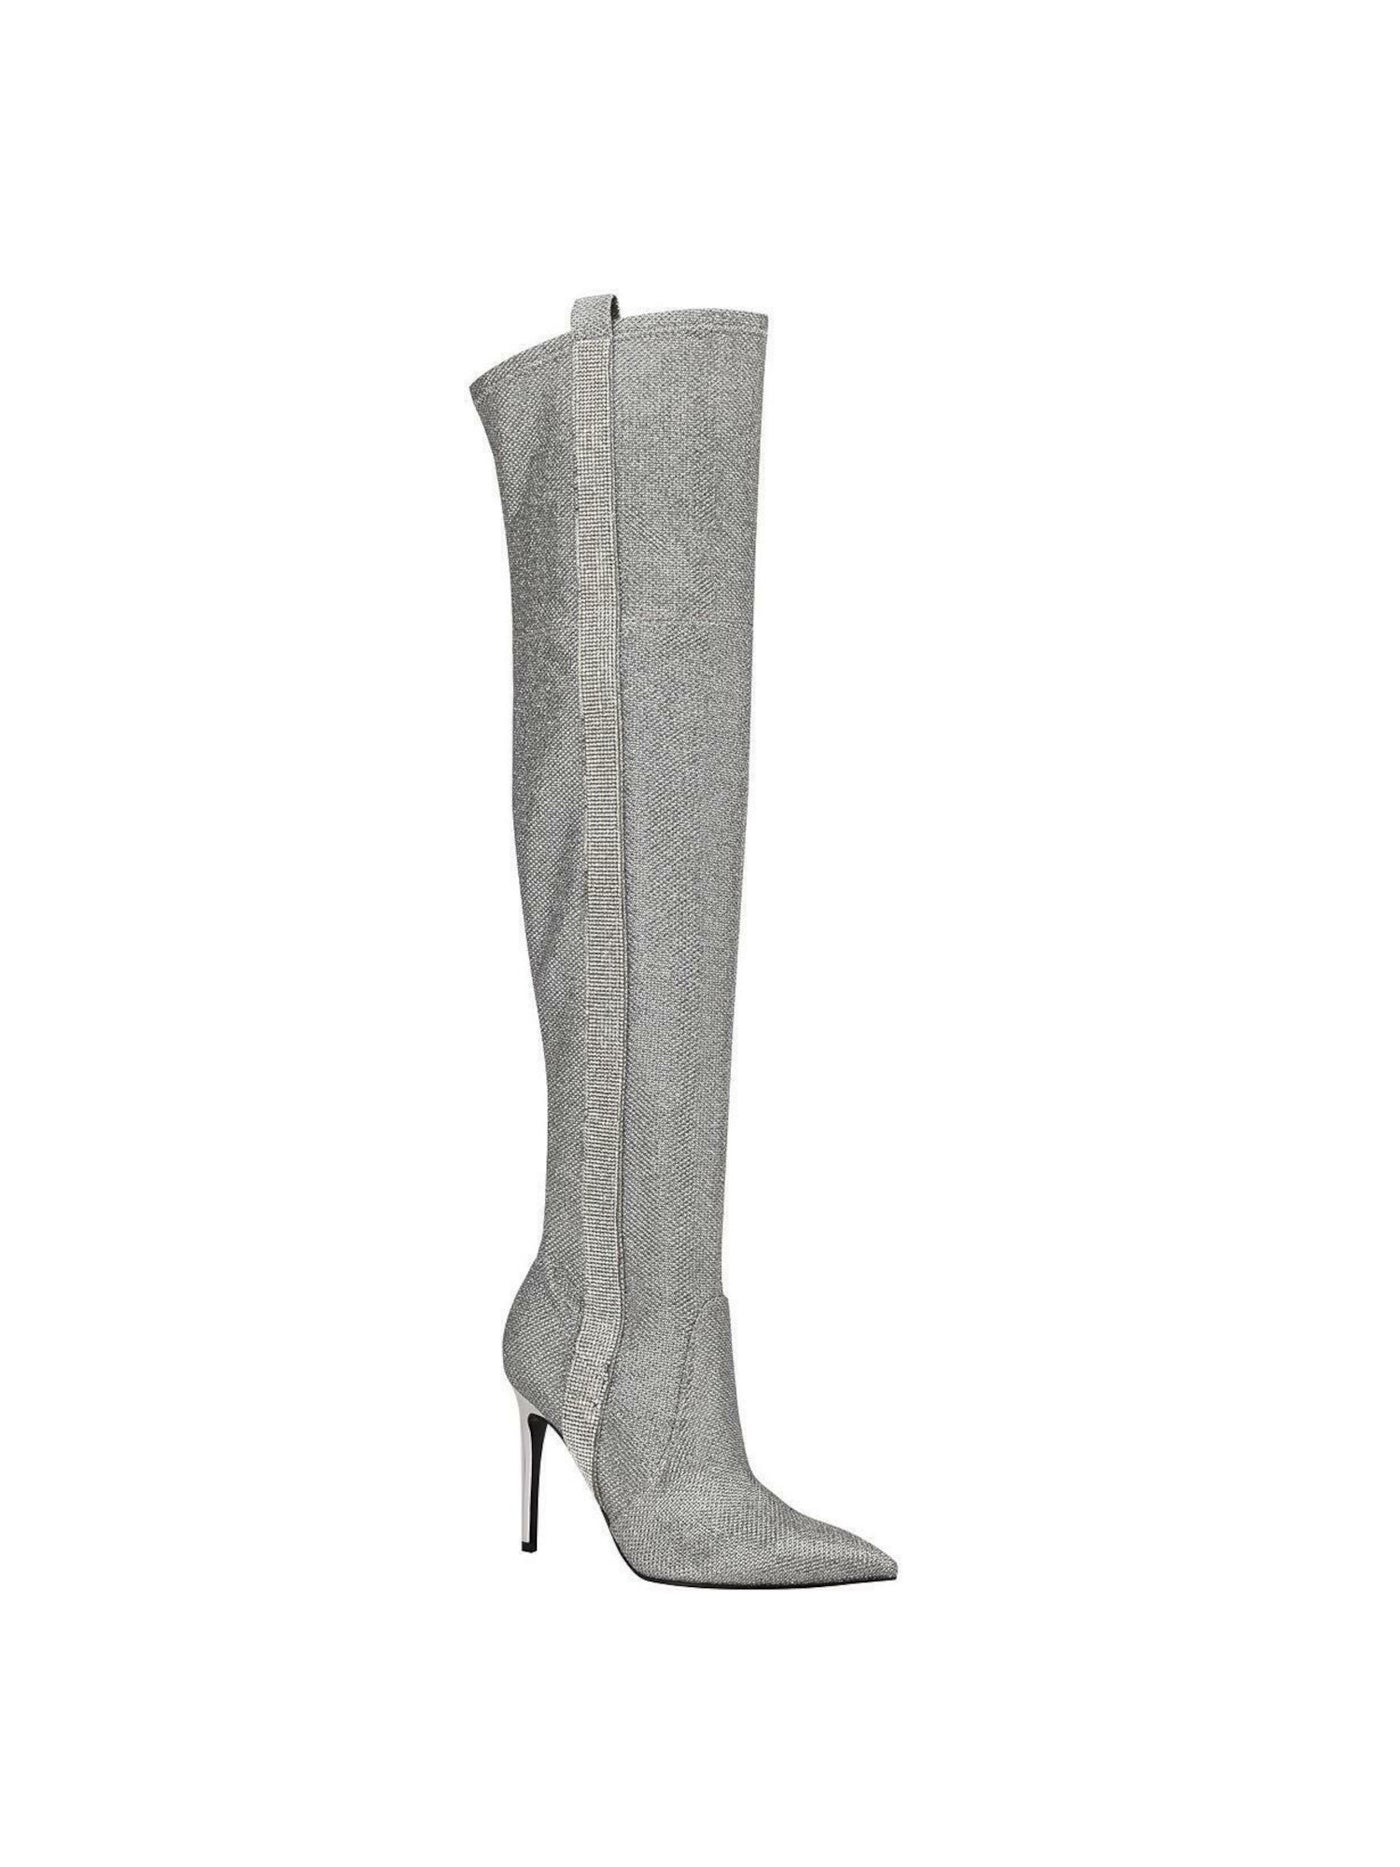 GUESS Womens Silver Rhinestone 21 Shaft Side Pull Tab Padded Bonisa Pointed Toe Stiletto Zip-Up Dress Boots 5 M